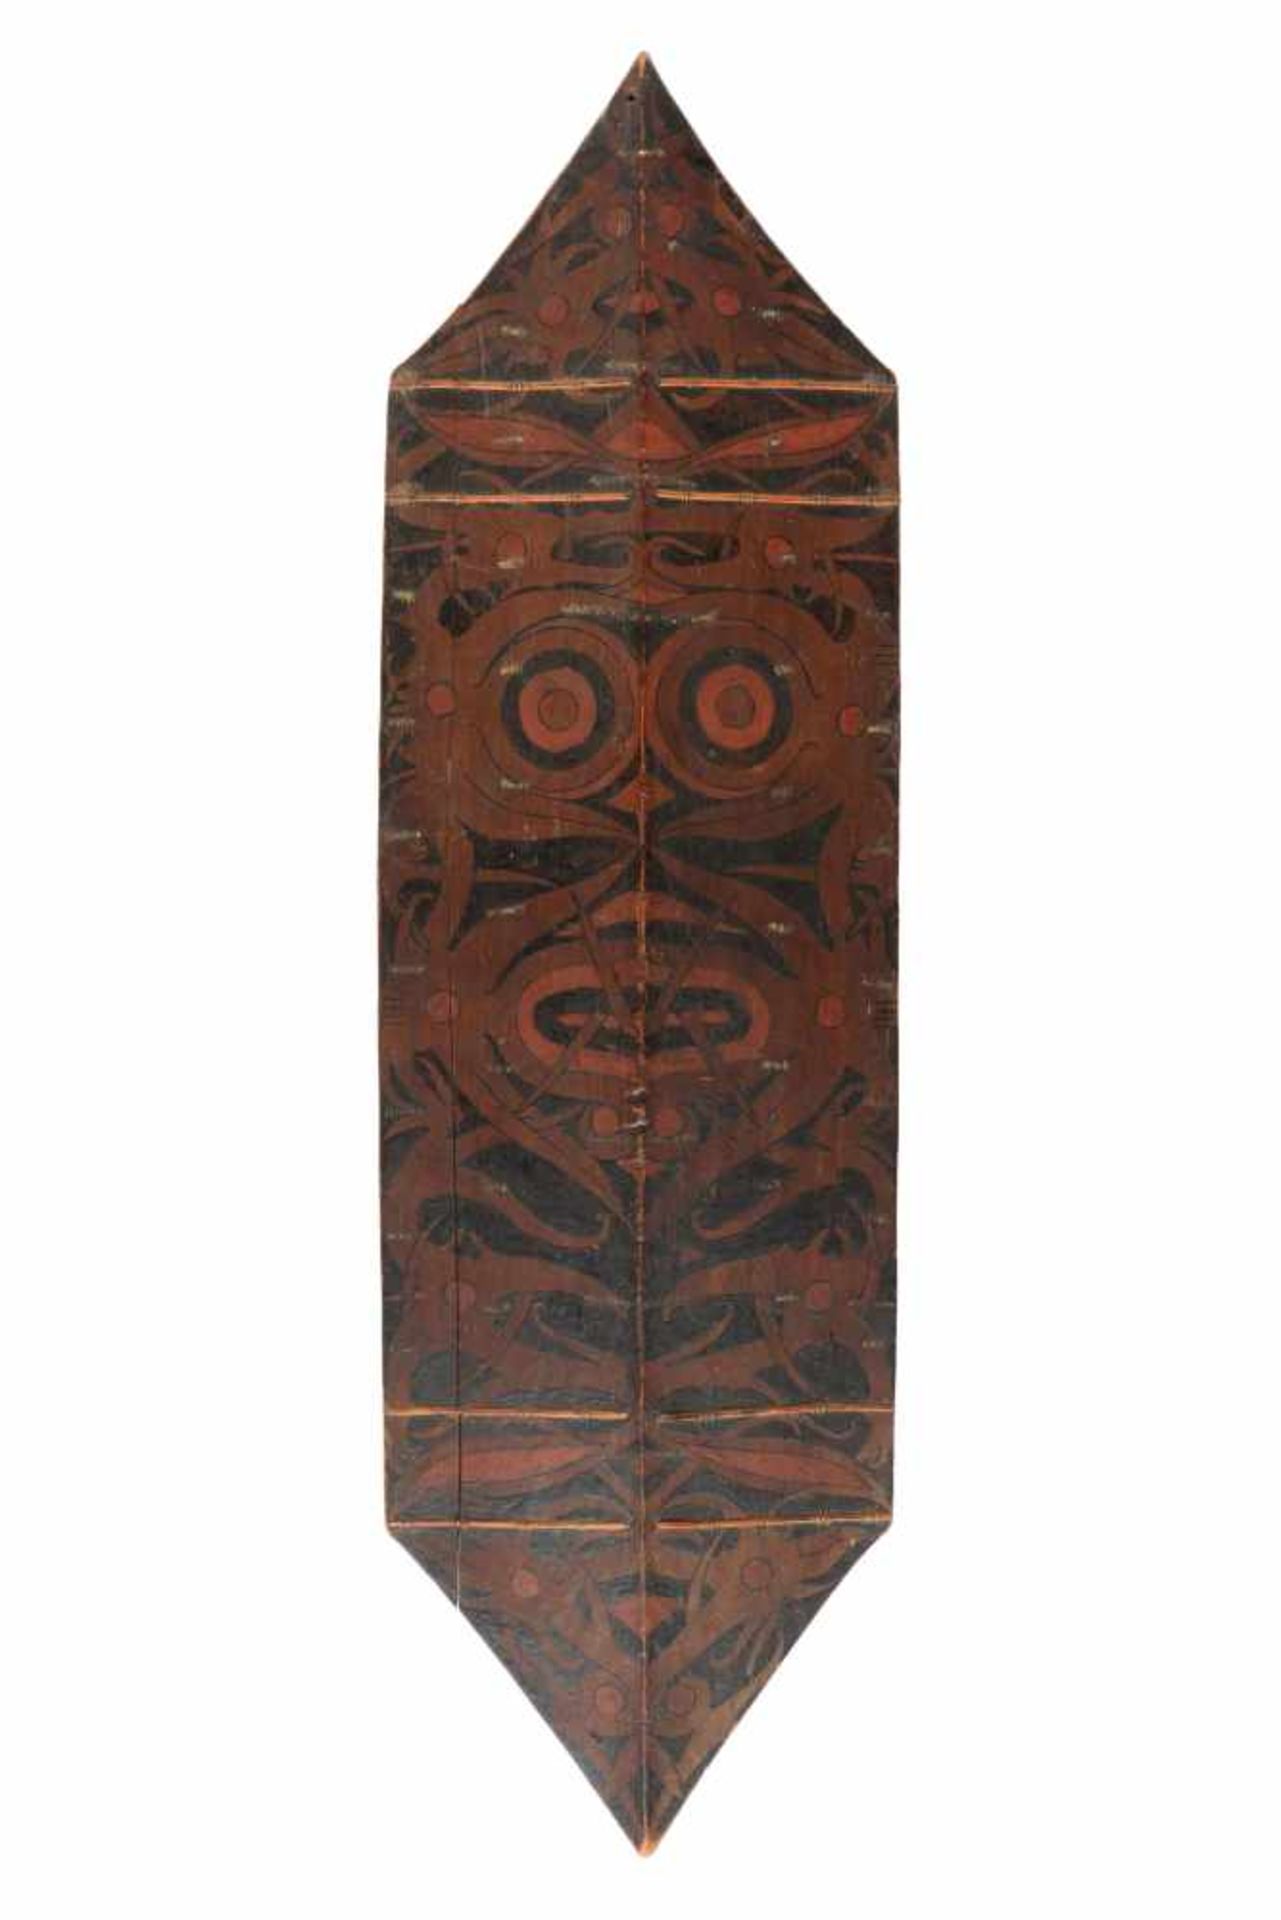 Borneo, Dayak, war shield, ca. 1900.With a painted central mythological figure and fine curved